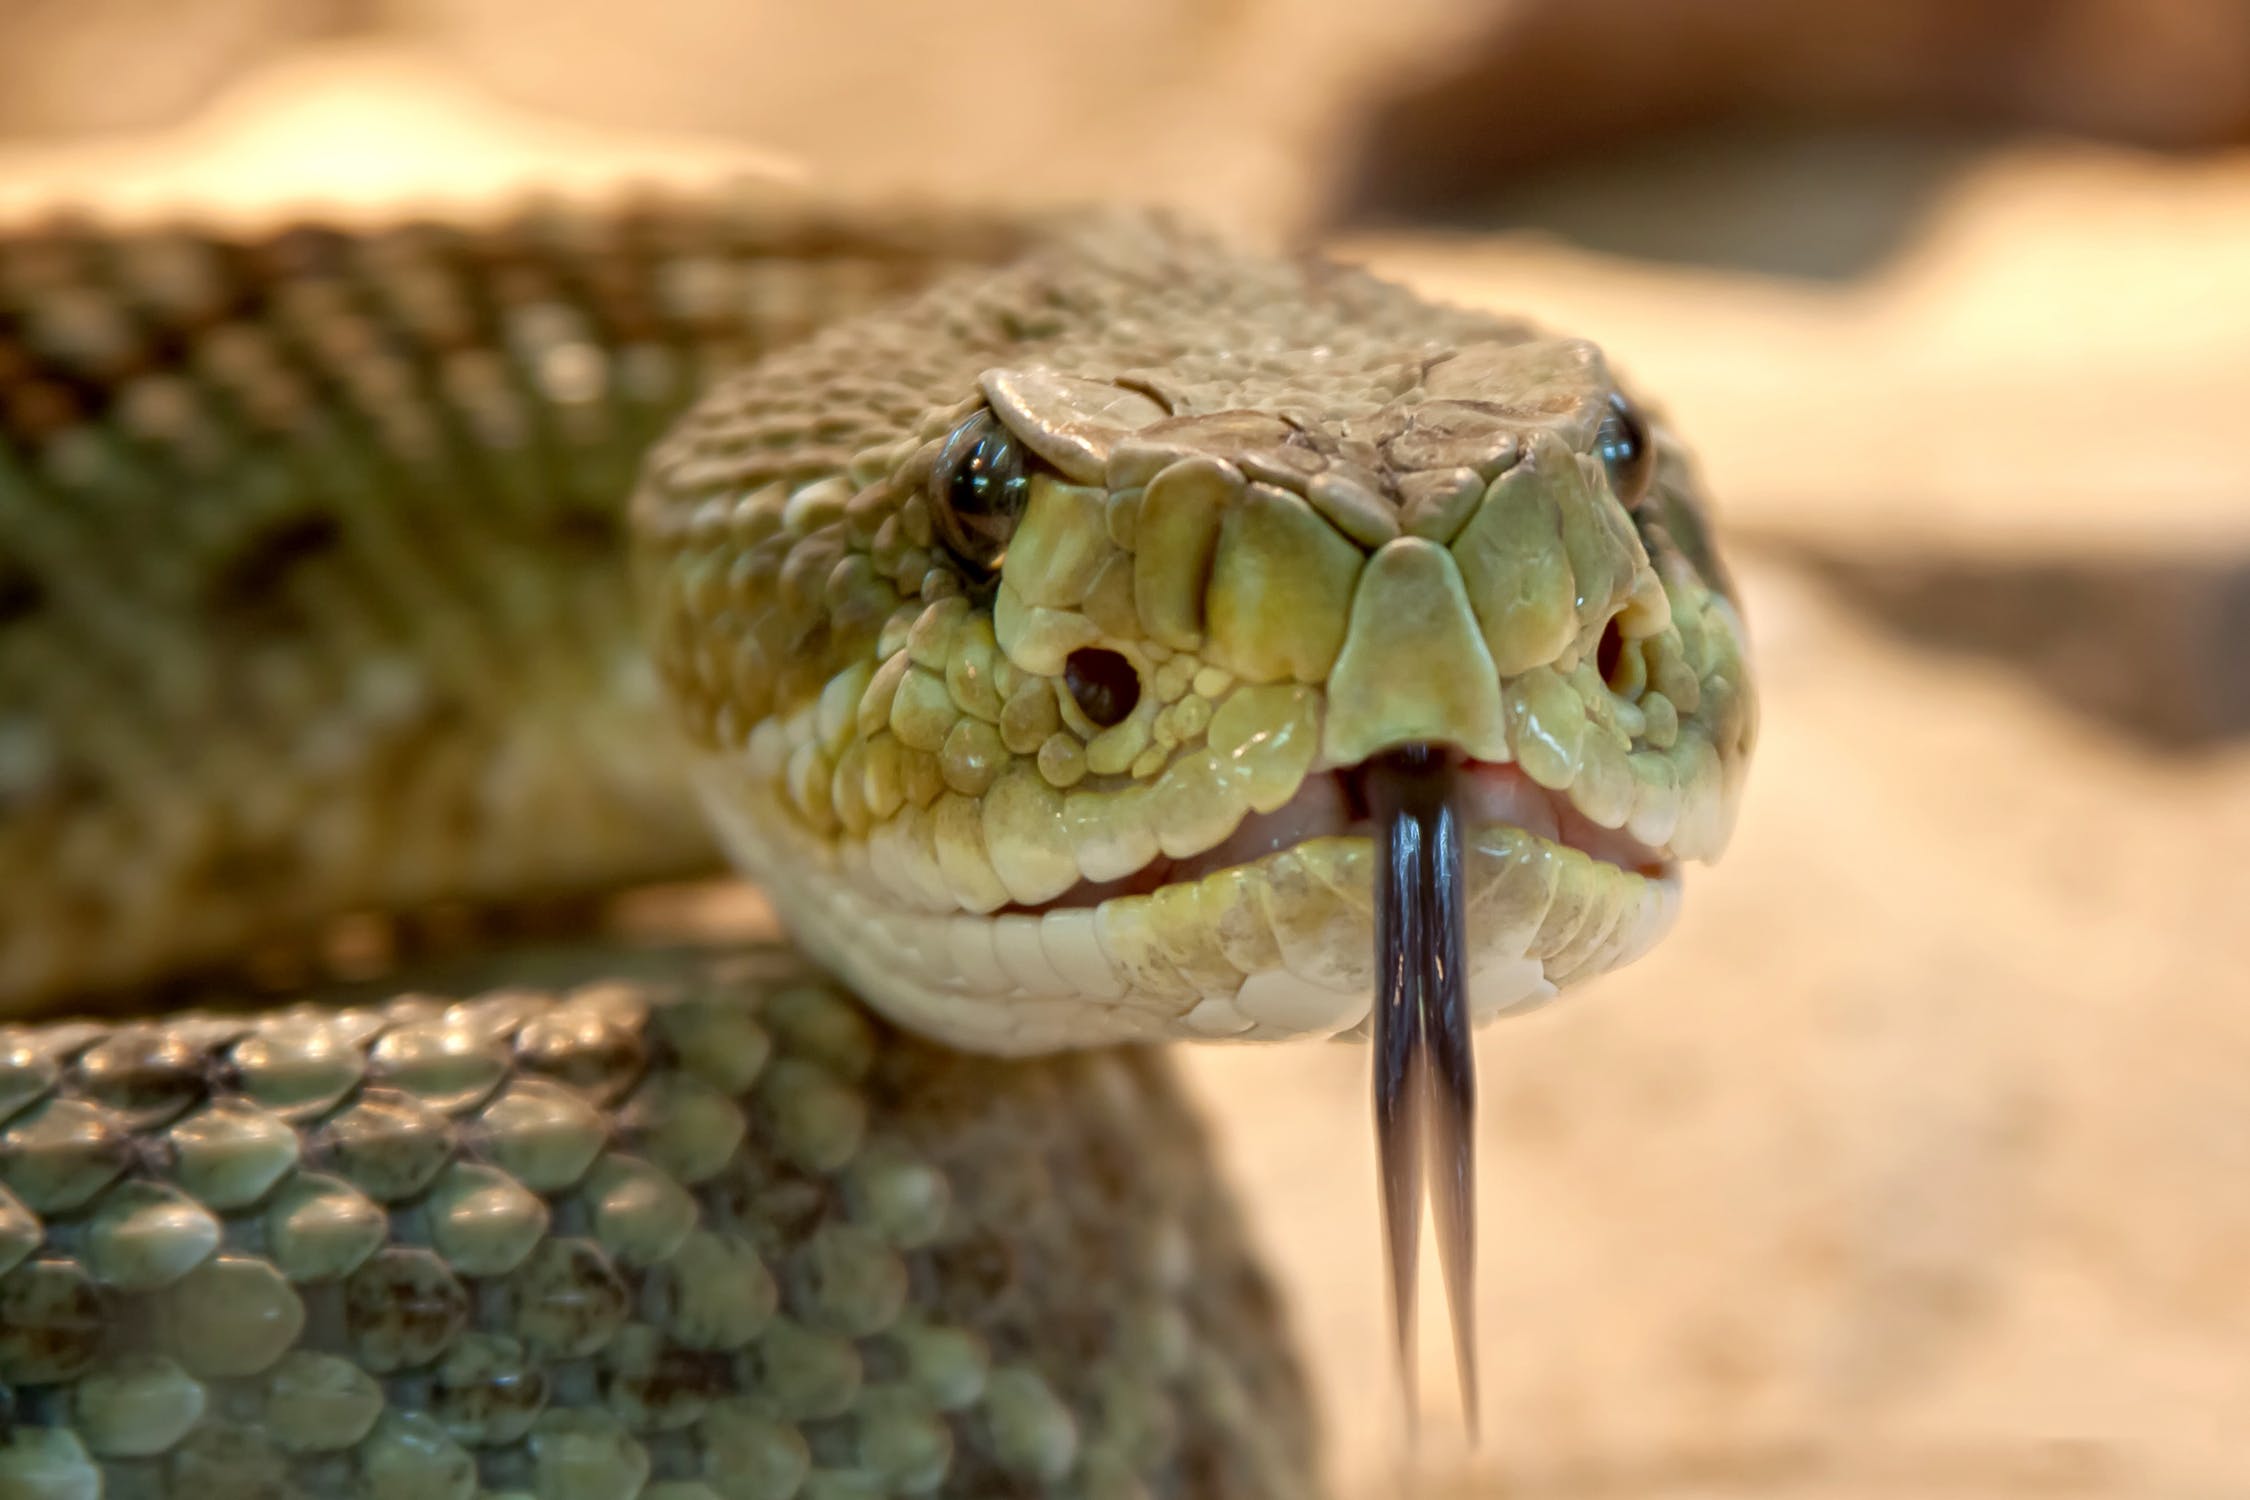 Facts About Snakes